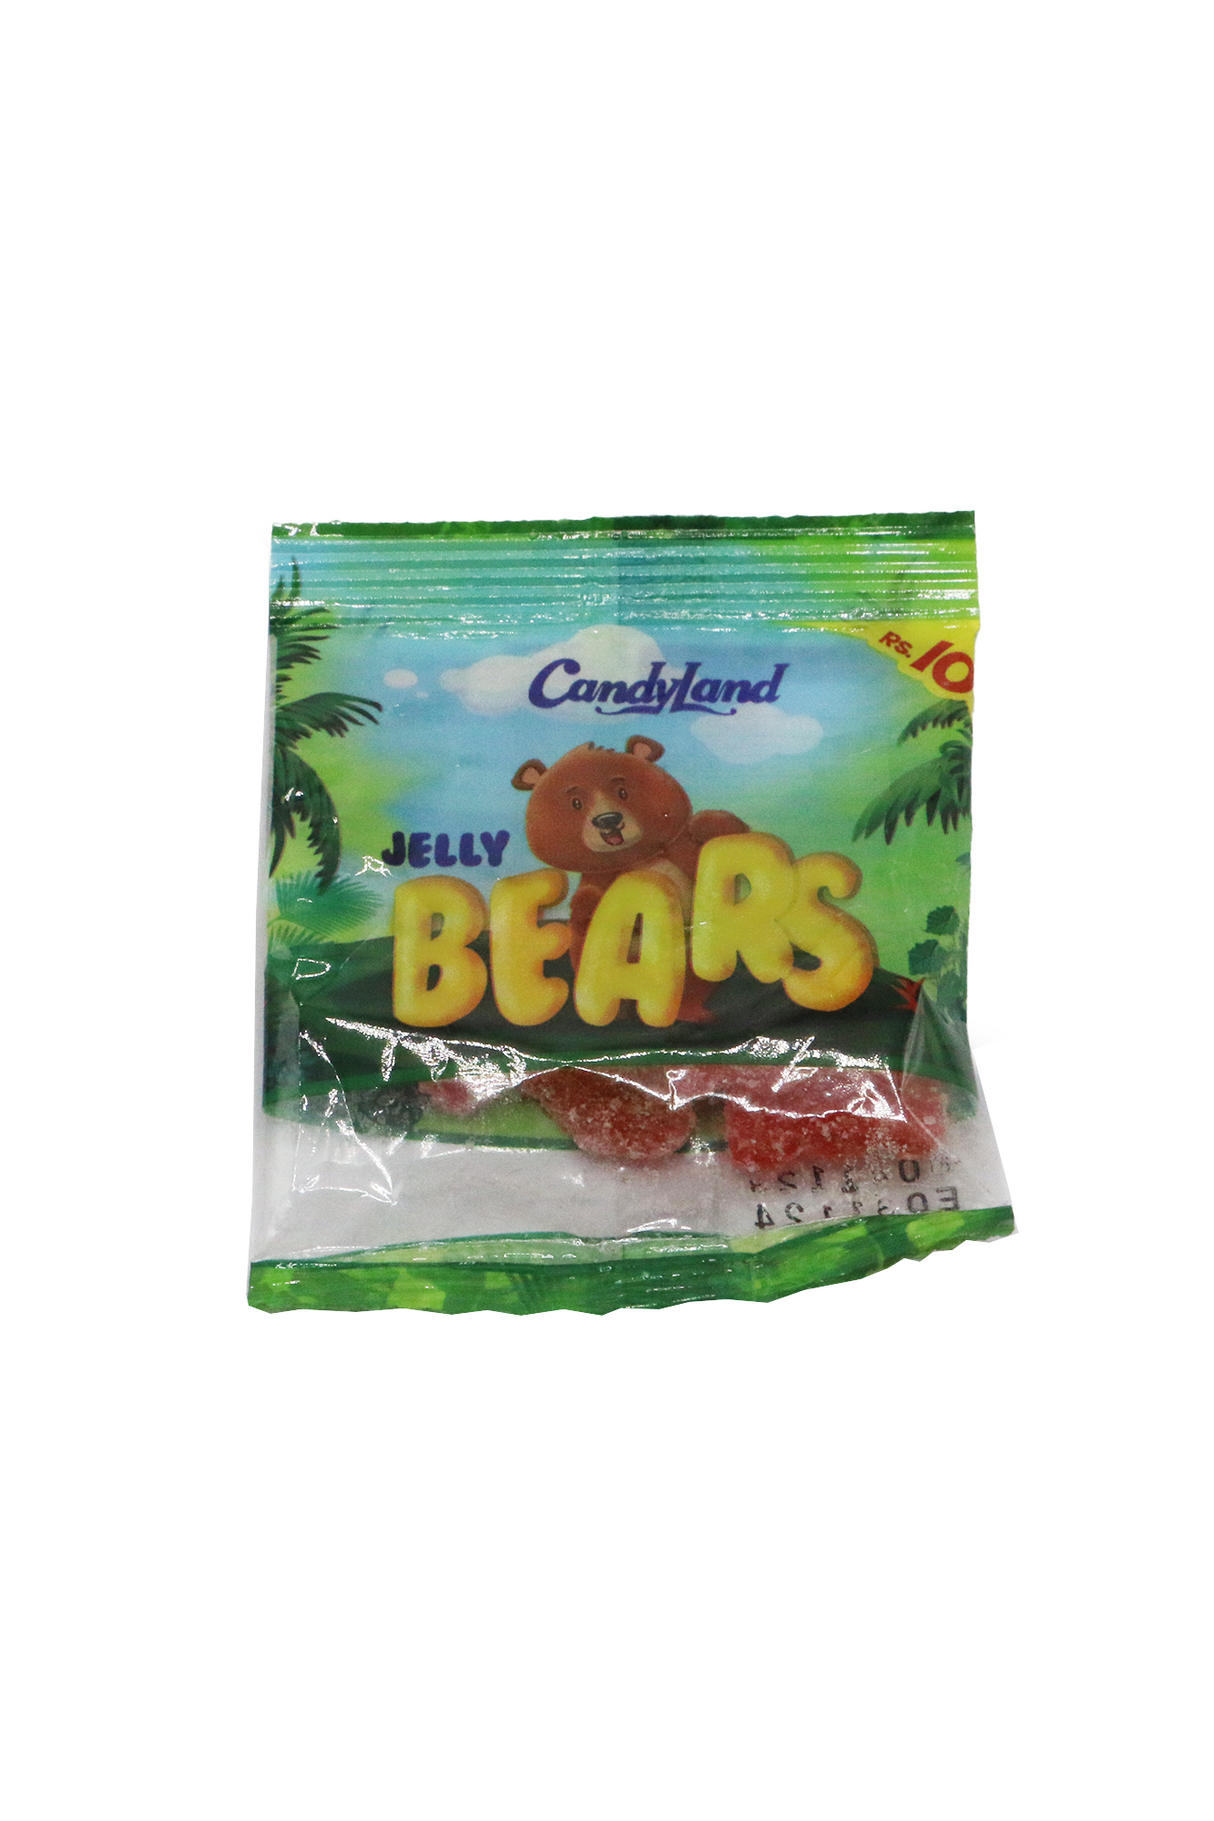 candyland jelly beans rs10